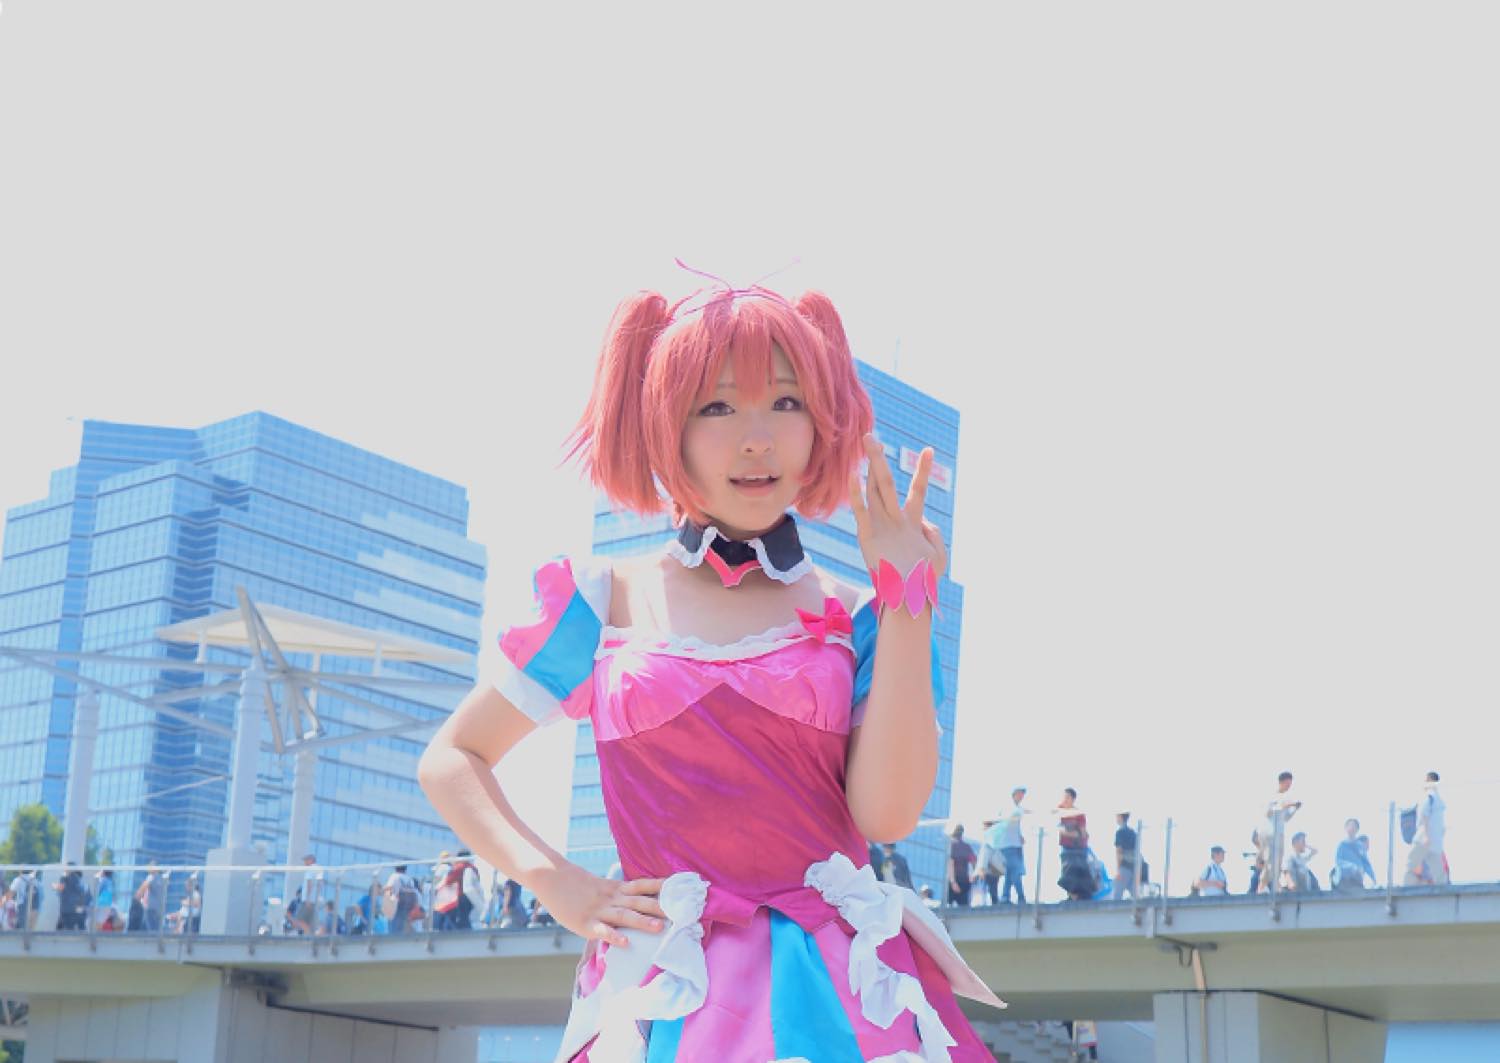 20 of the Hottest Cosplayers Spotted at Comiket 90!